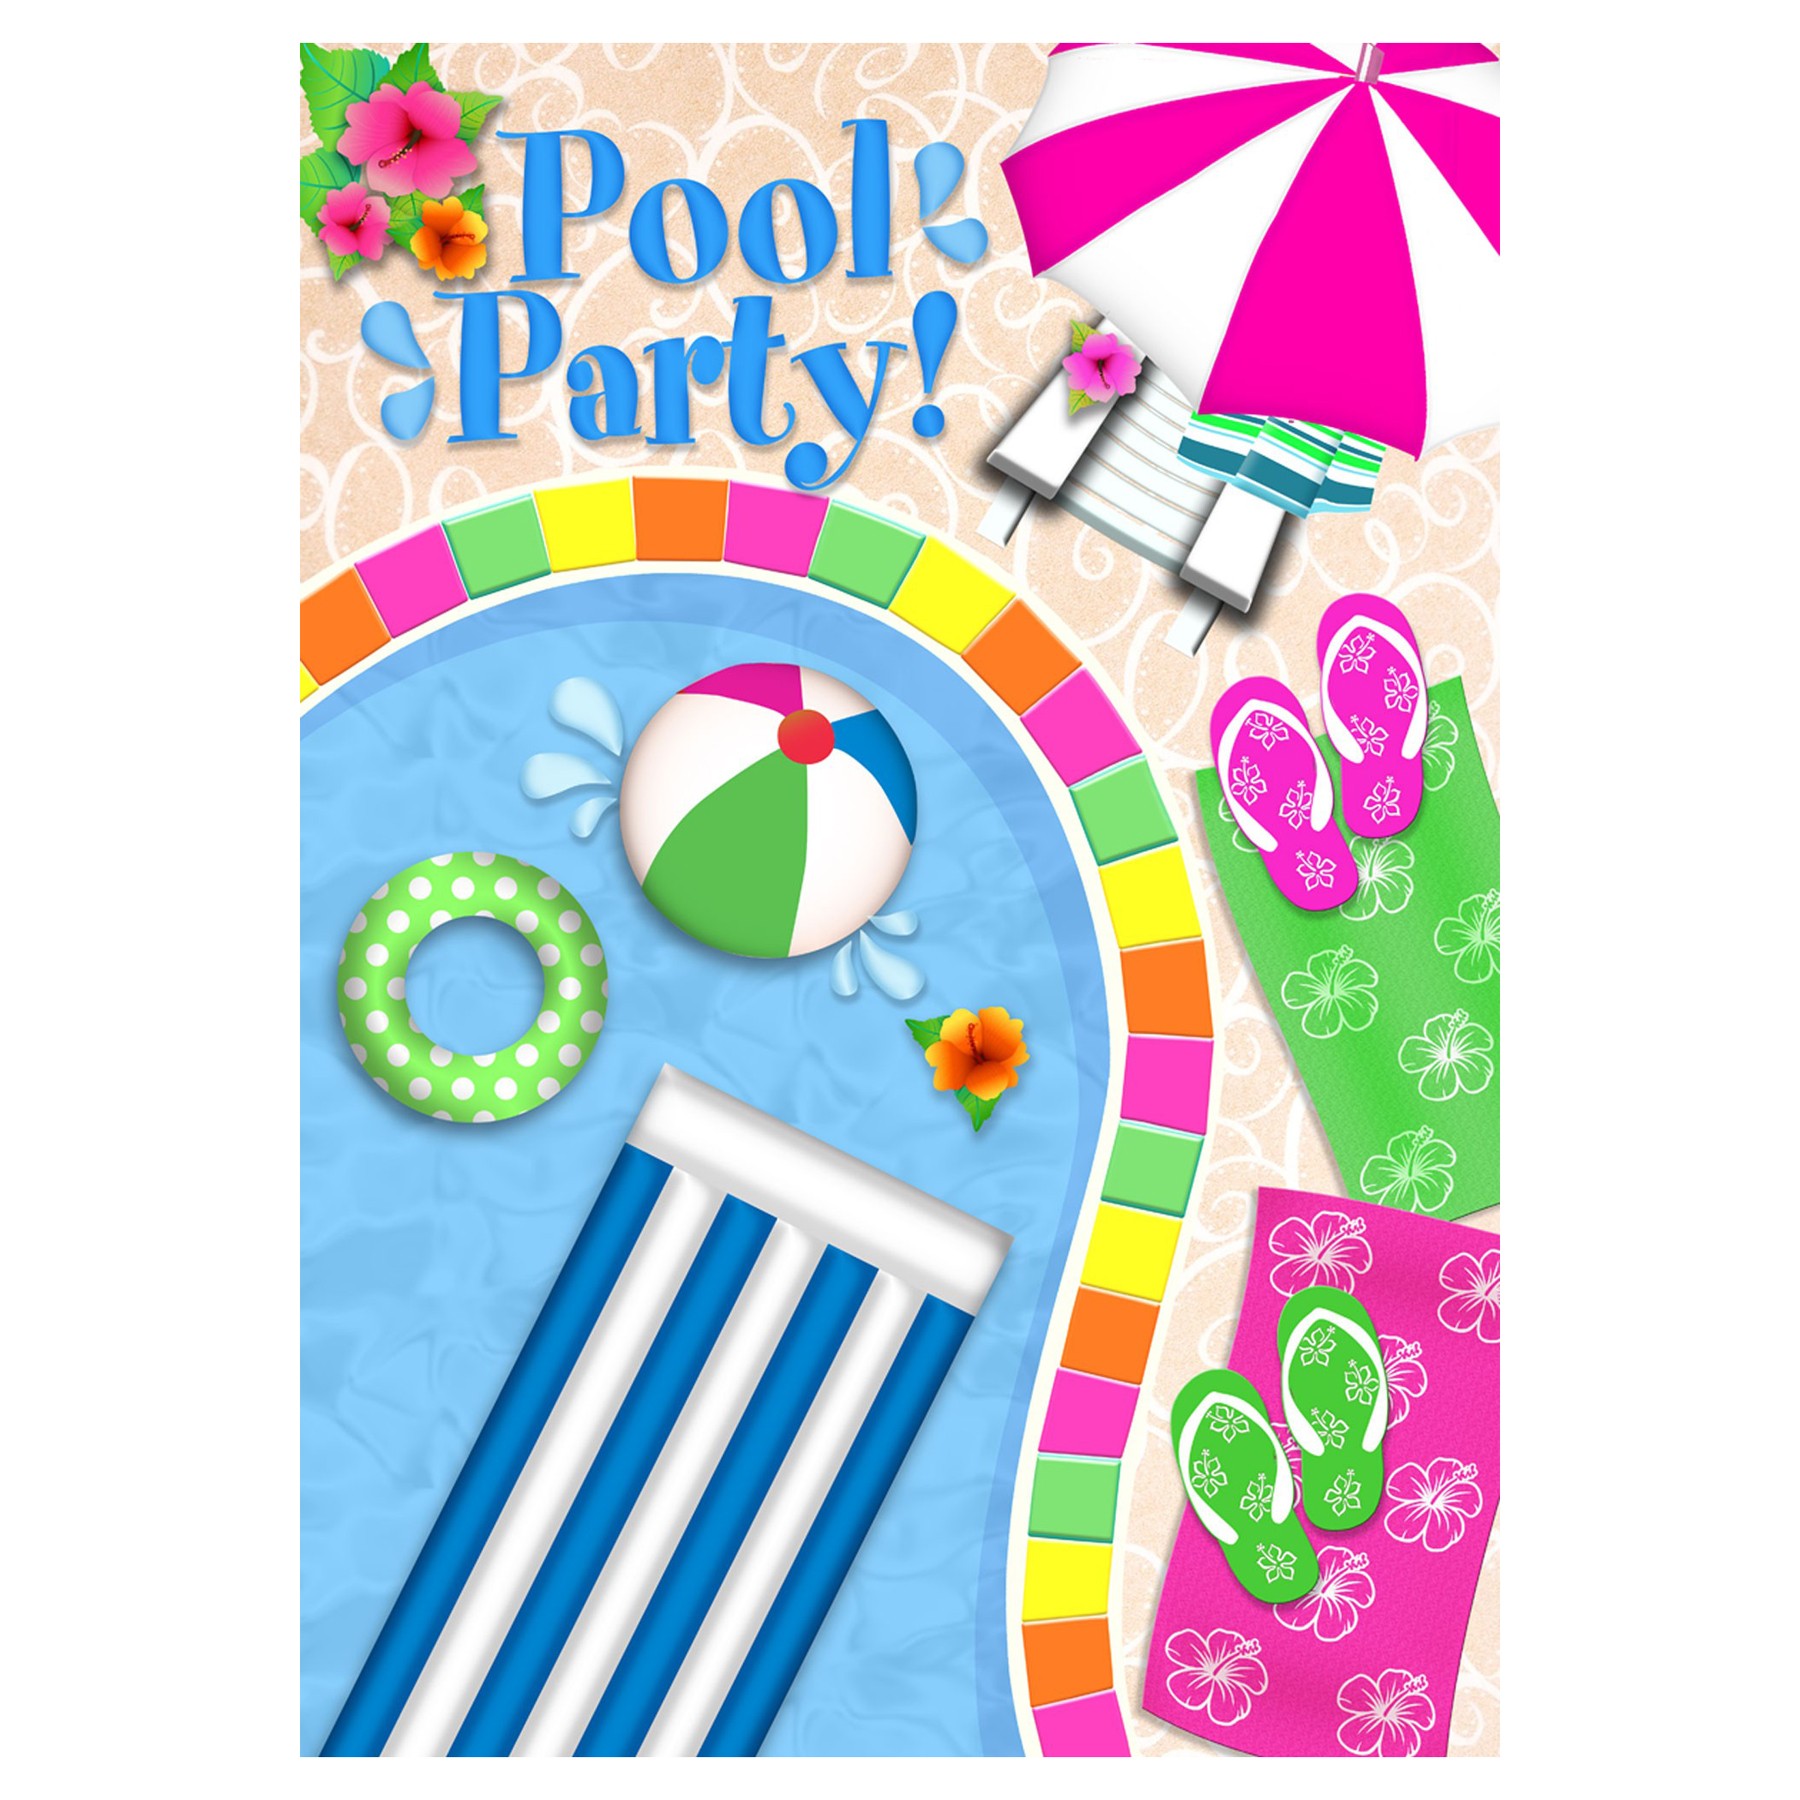 Free Images Of A Pool, Download Free Clip Art, Free Clip Art.